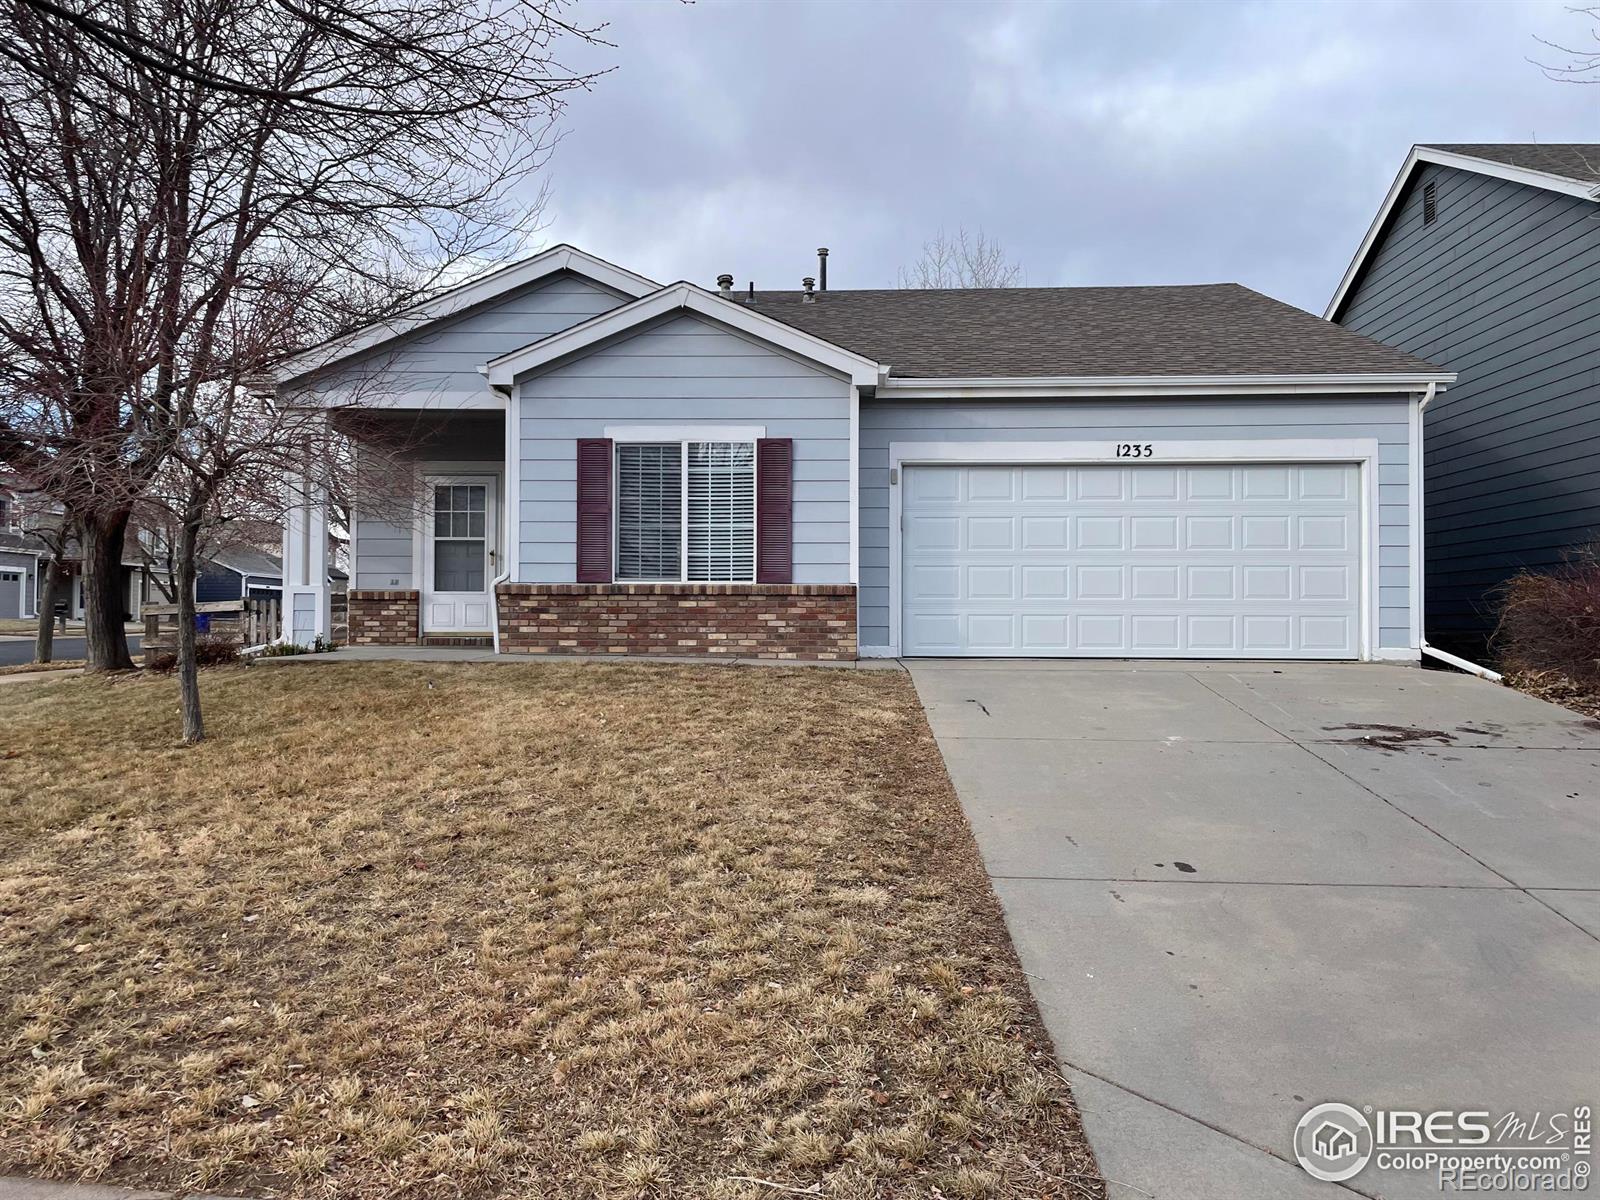 1235  101st Ave Ct, greeley MLS: 456789999320 Beds: 3 Baths: 2 Price: $379,900